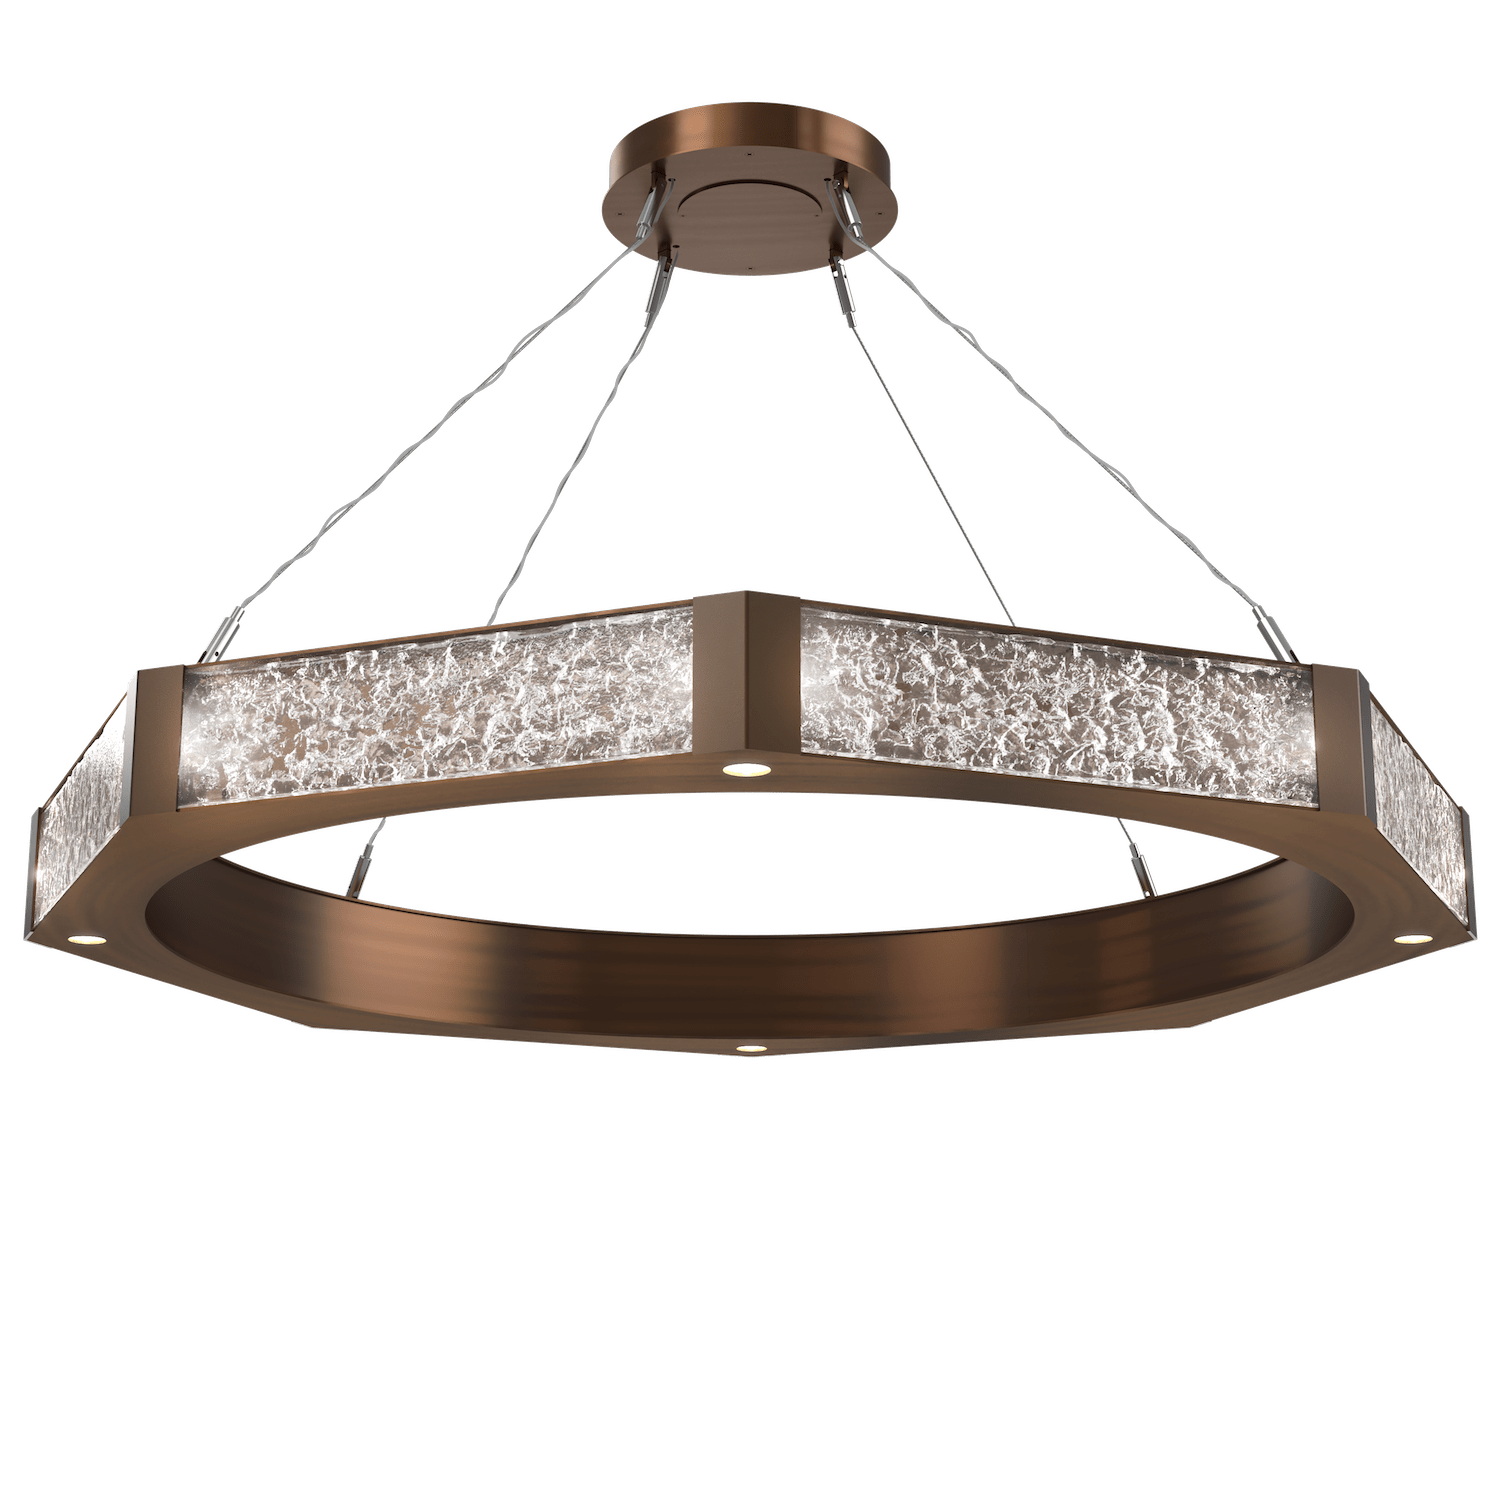 CHB0061-48-RB-GC-Hammerton-Studio-Glacier-48-inch-ring-chandelier-with-oil-rubbed-bronze-finish-and-clear-blown-glass-with-geo-clear-cast-glass-diffusers-and-LED-lamping